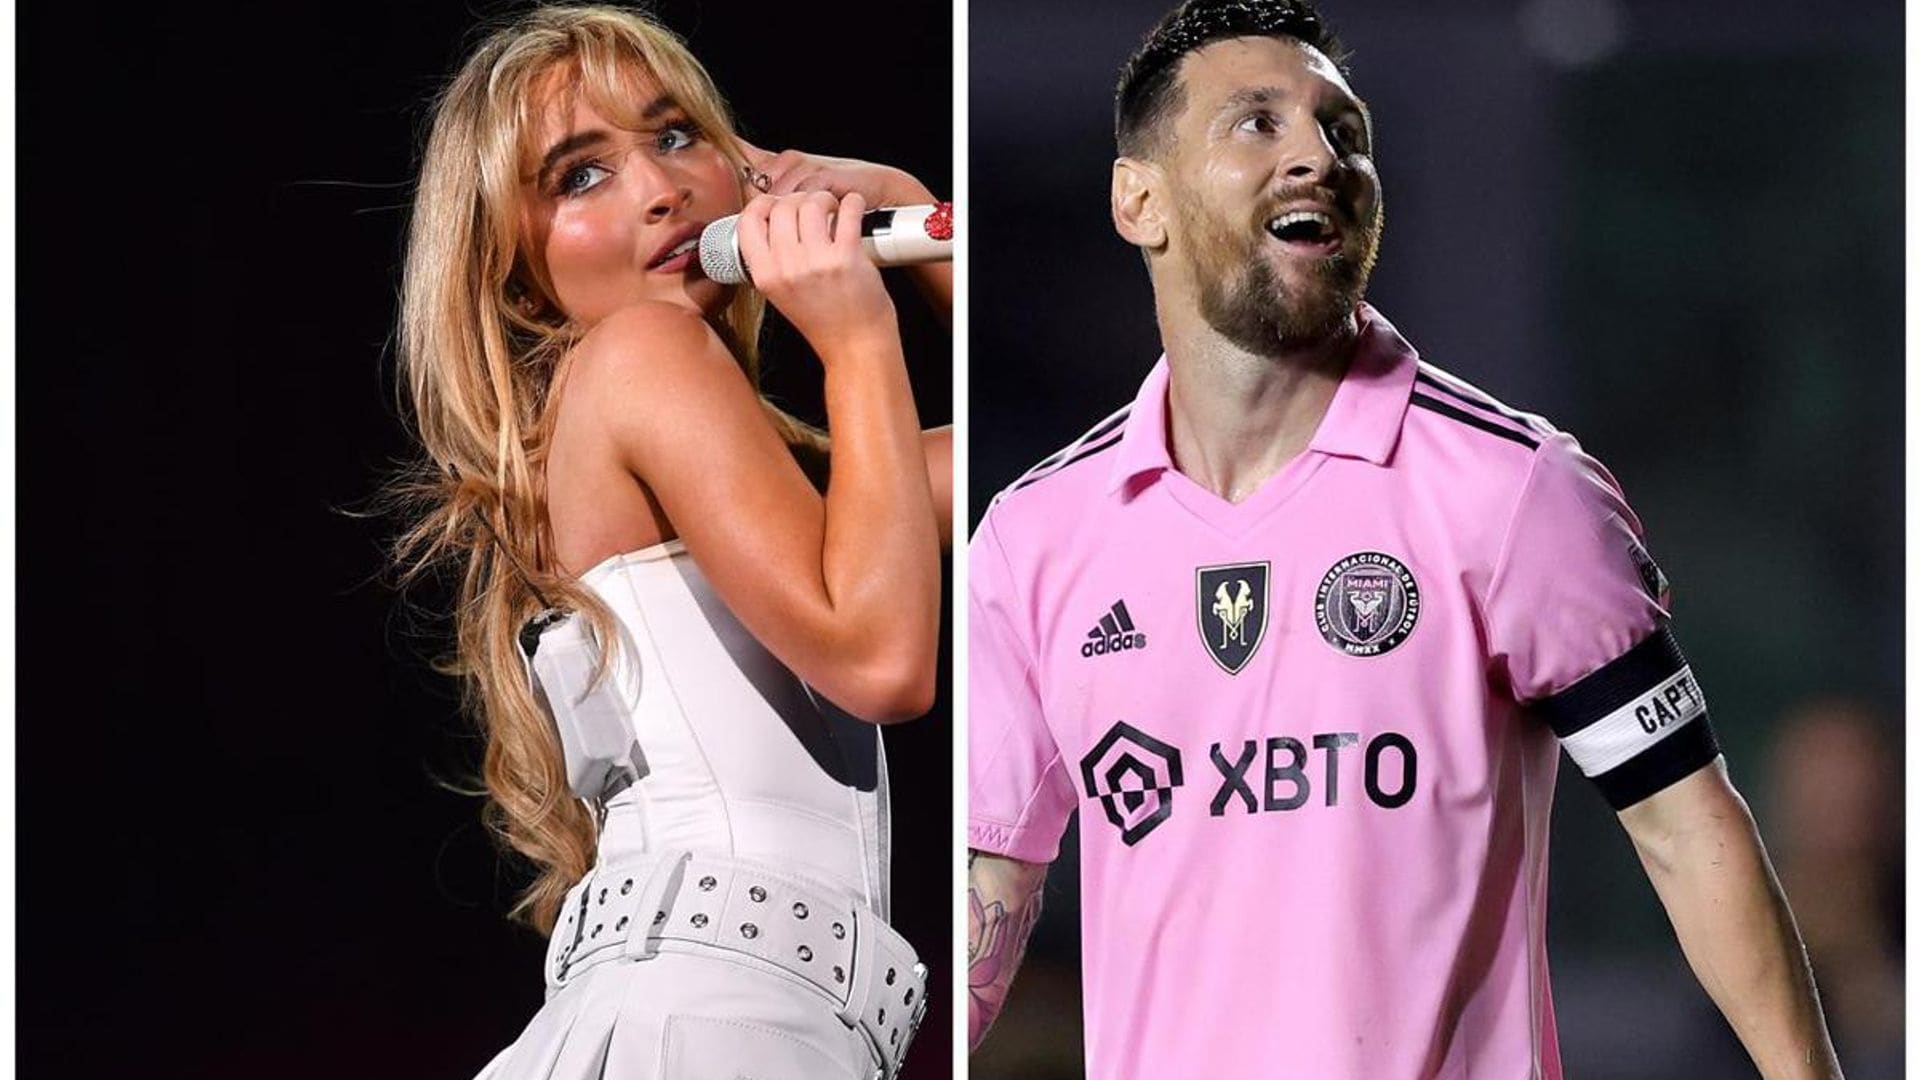 Sabrina Carpenter gives Lionel Messi a shout-out during Taylor Swift’s ‘Eras Tour’ in Argentina